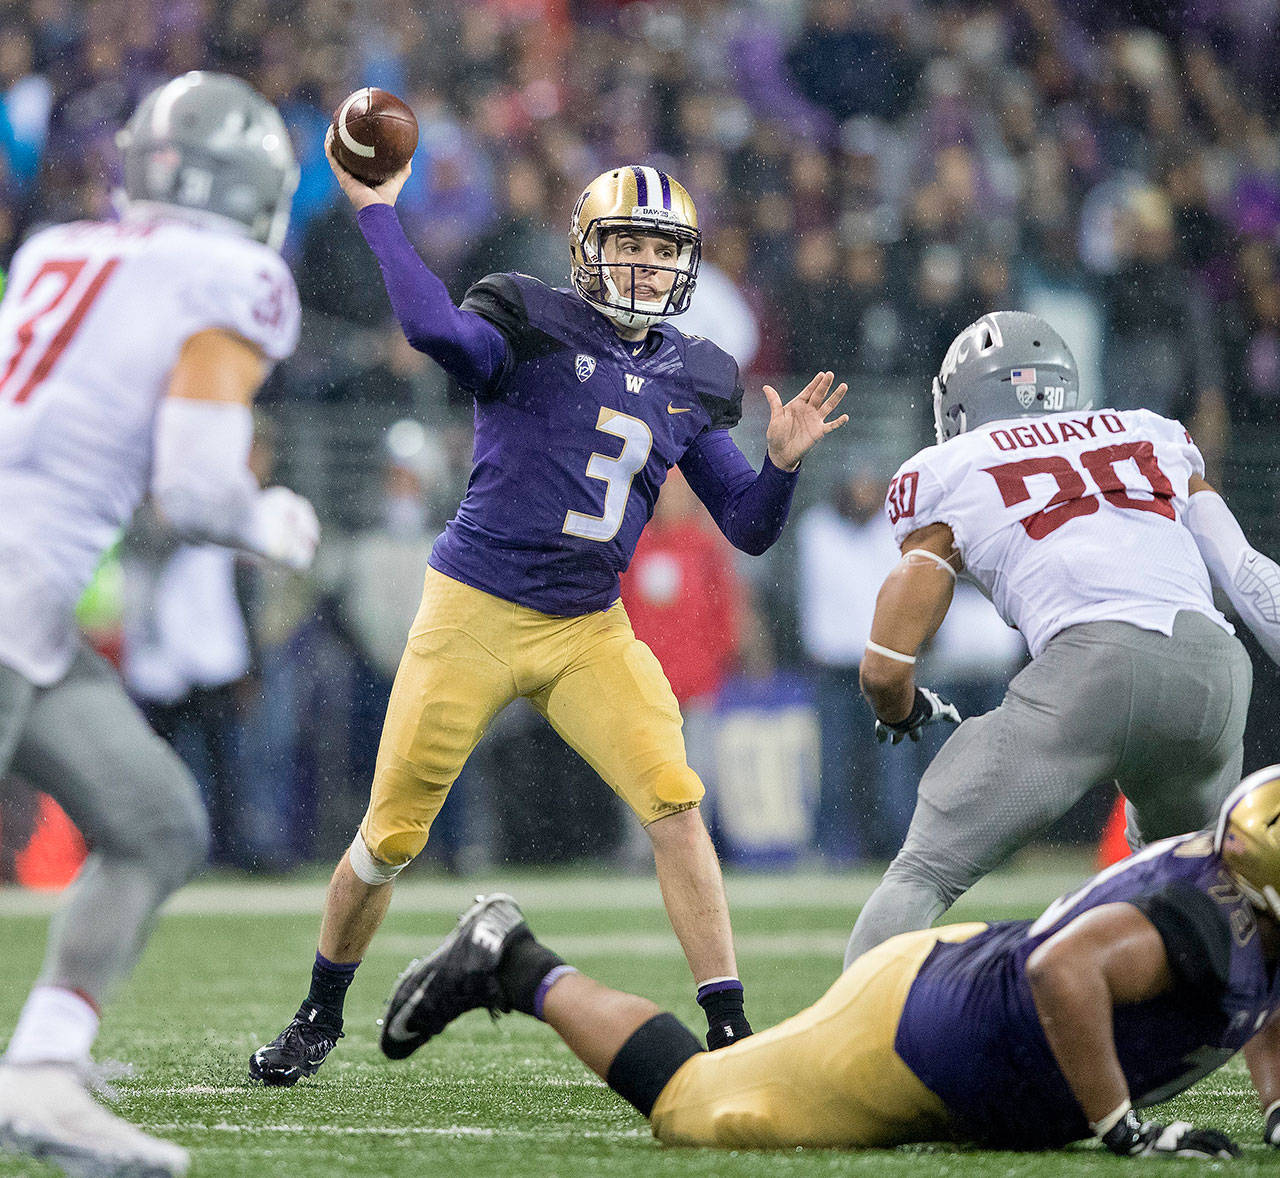 Washington quarterback Jake Browning (3) makes a second-quarter throw against Washington State November 25, 2017. The No. 6 Huskies open the season against No. 9 Auburn in a highly-anticipated contest at 12:30 p.m. Saturday. (Mike Siegel/Seattle Times/TNS)